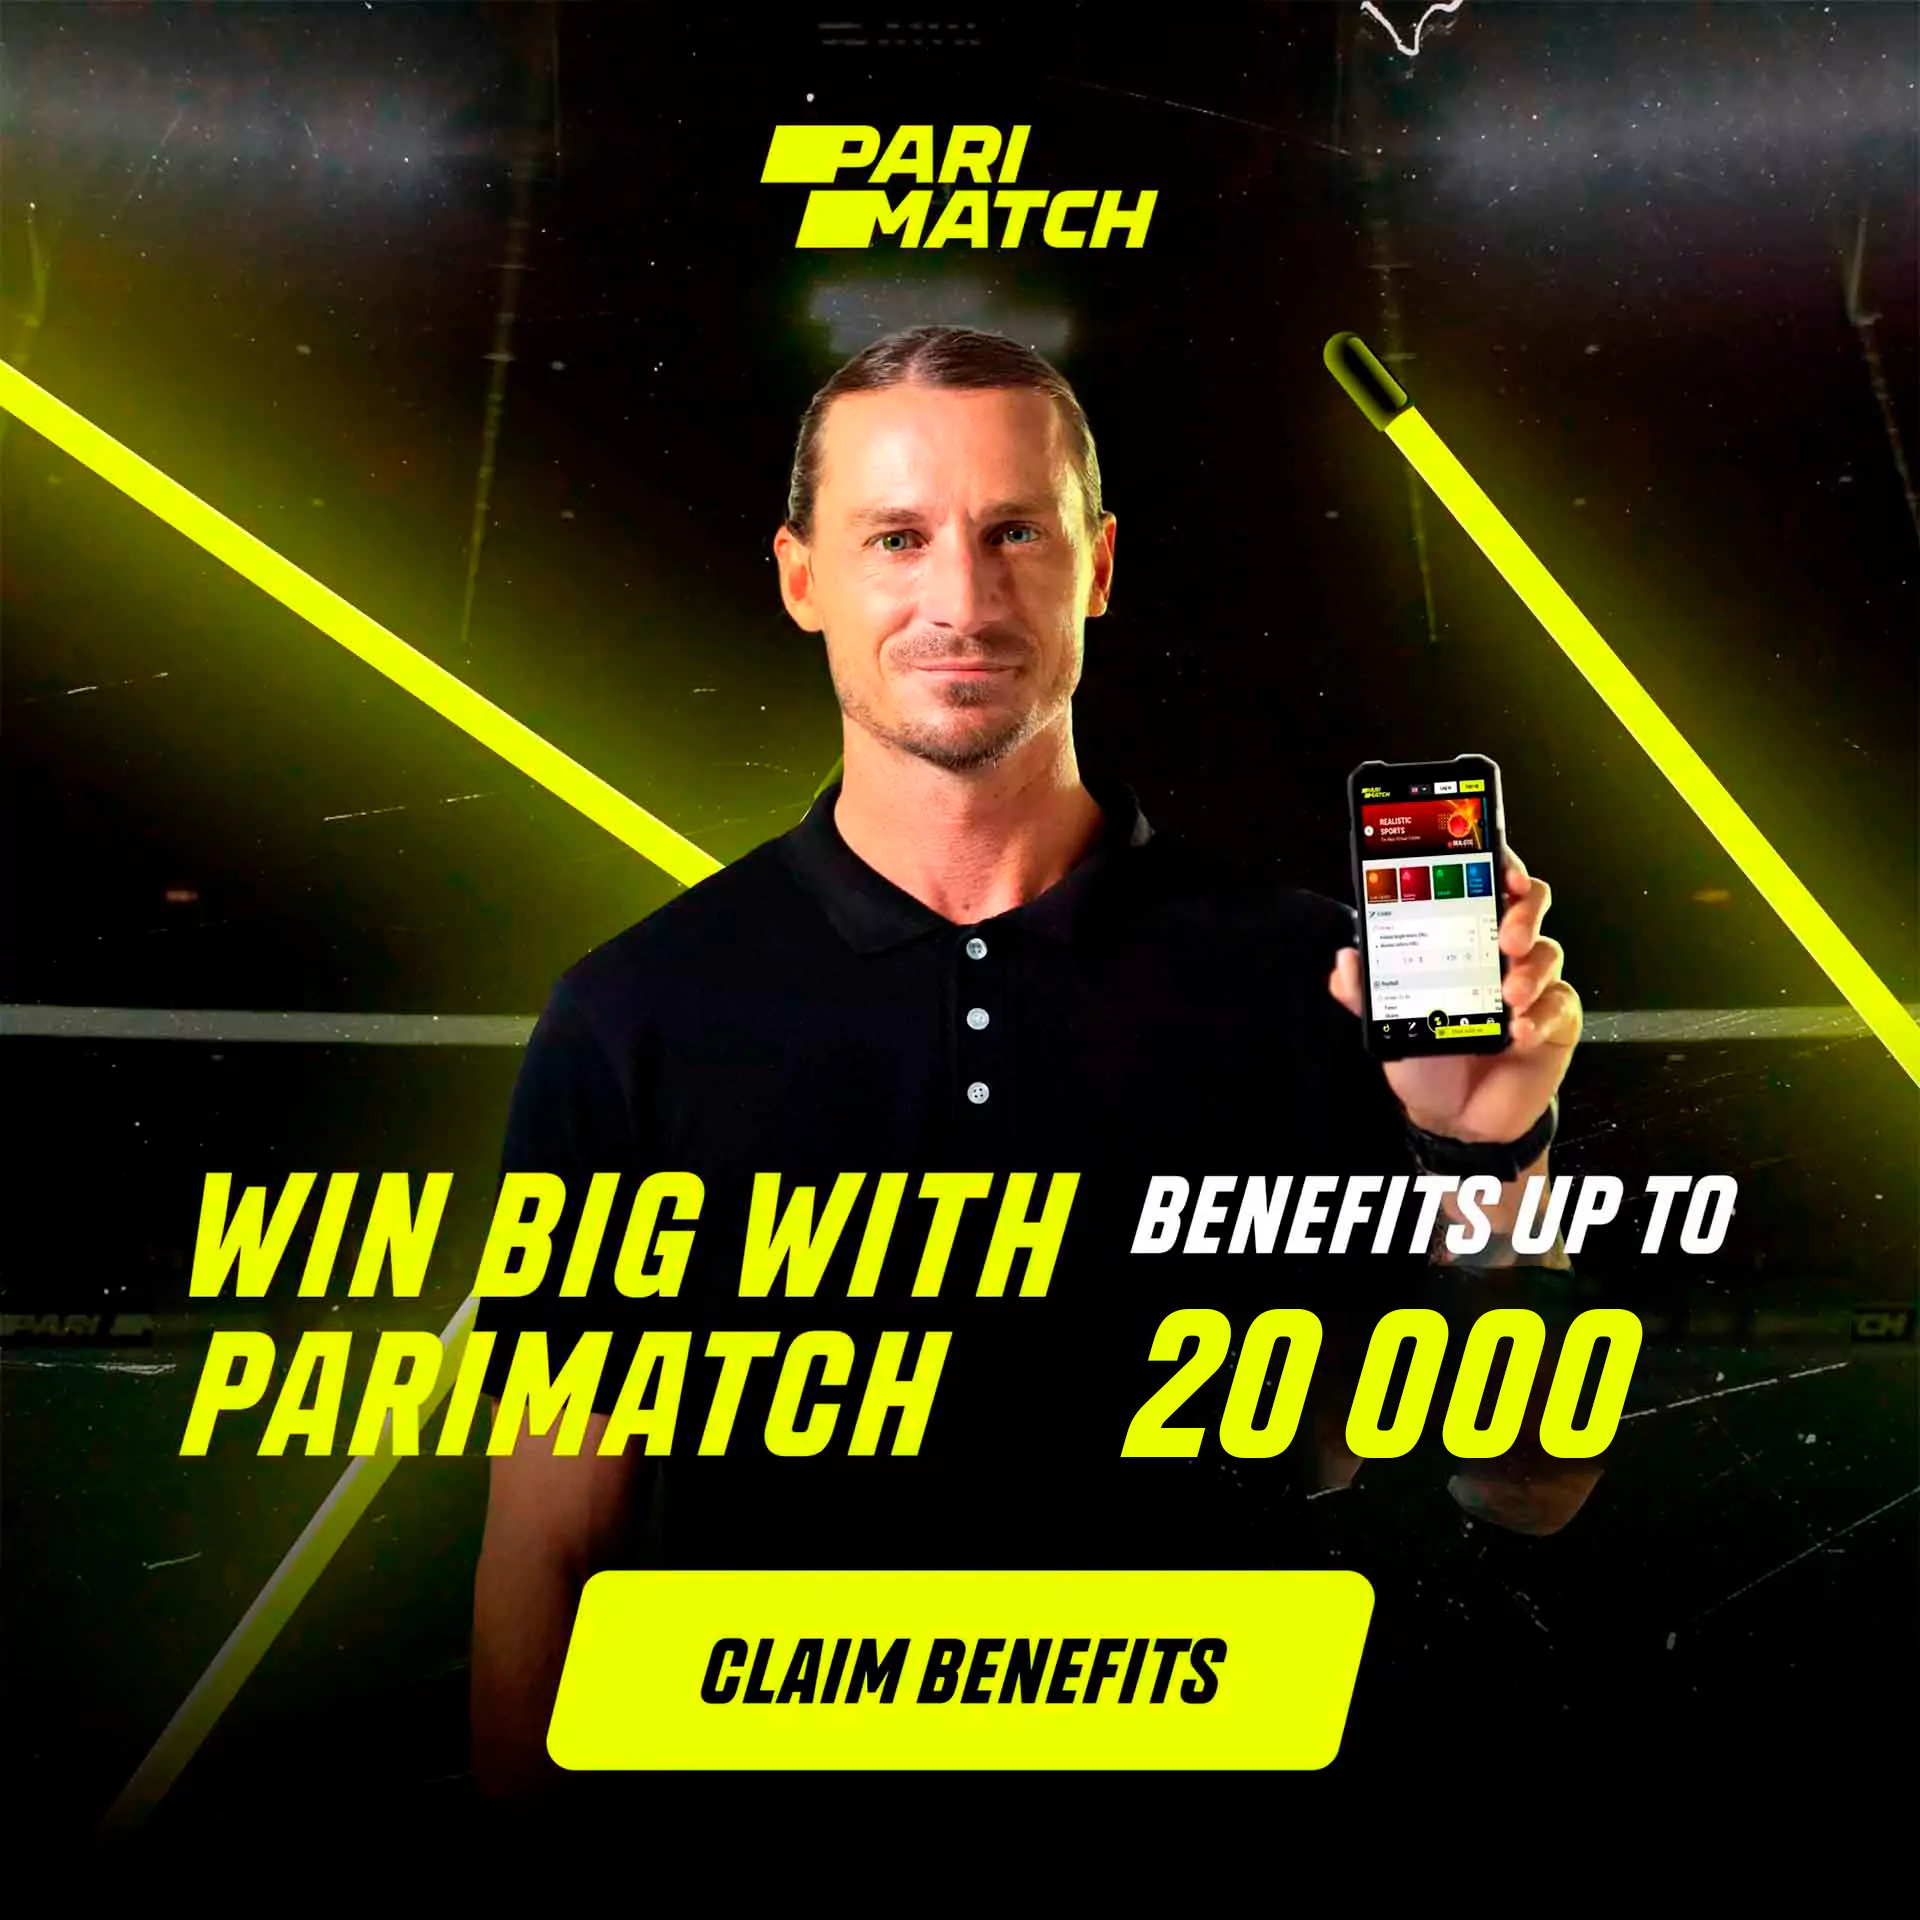 Dale Willem Steyn join Parimatch as ambassador and Parimatch special offer for IPL betting